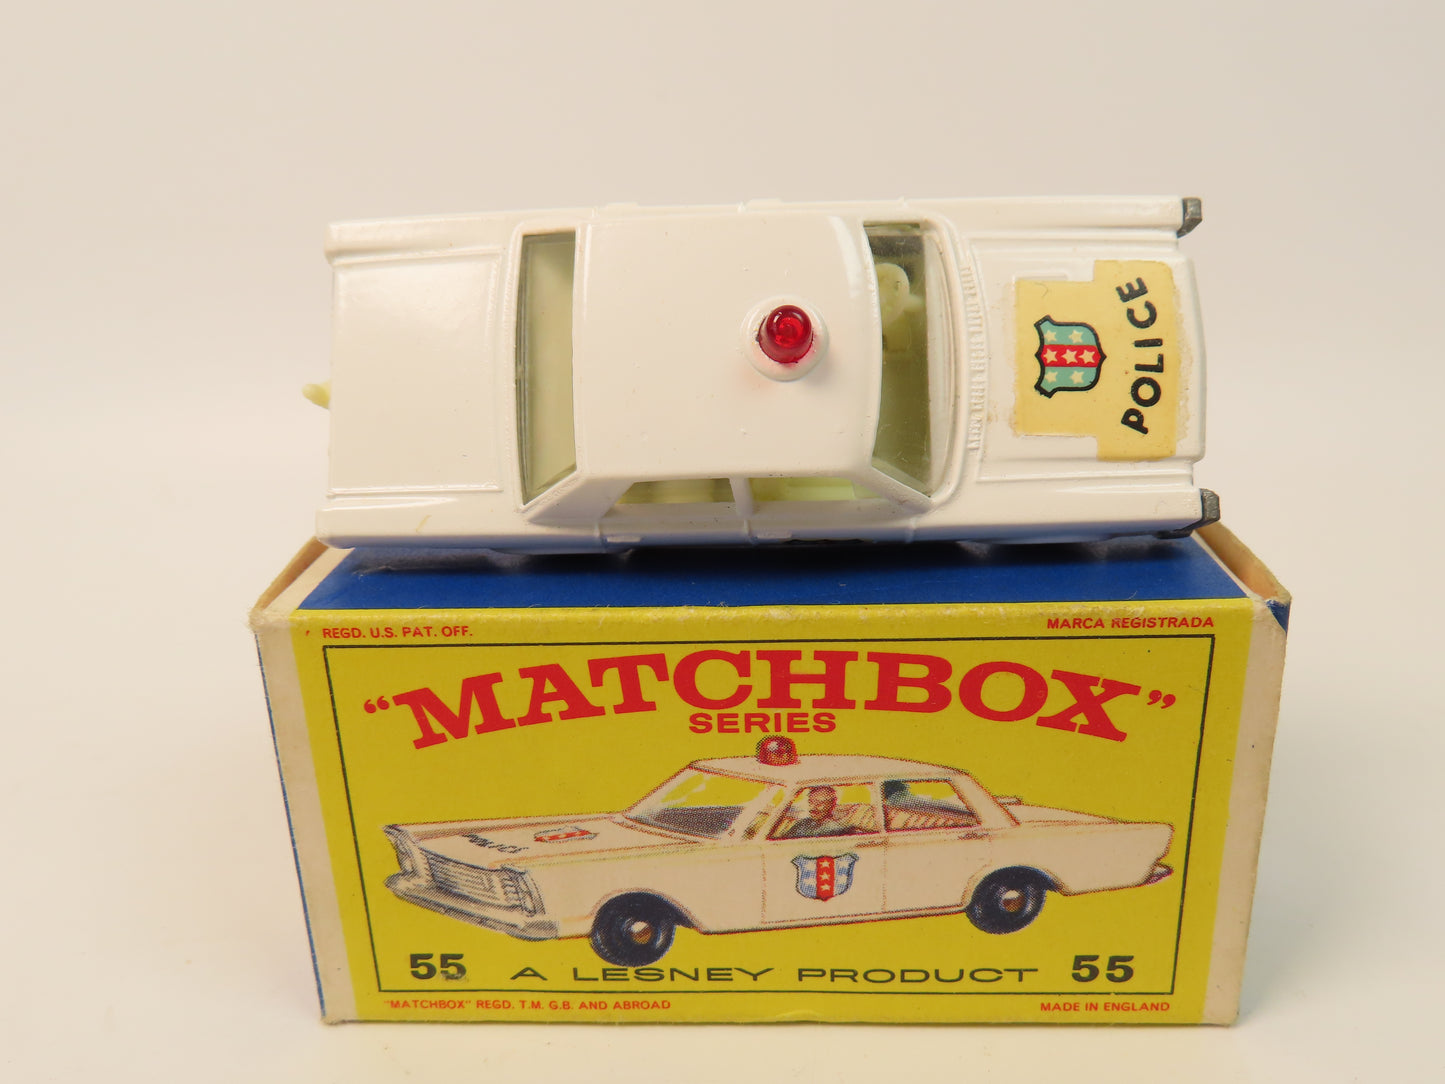 RESERVED ROB Matchbox 55 - Police Car - White - Very near mint boxed!